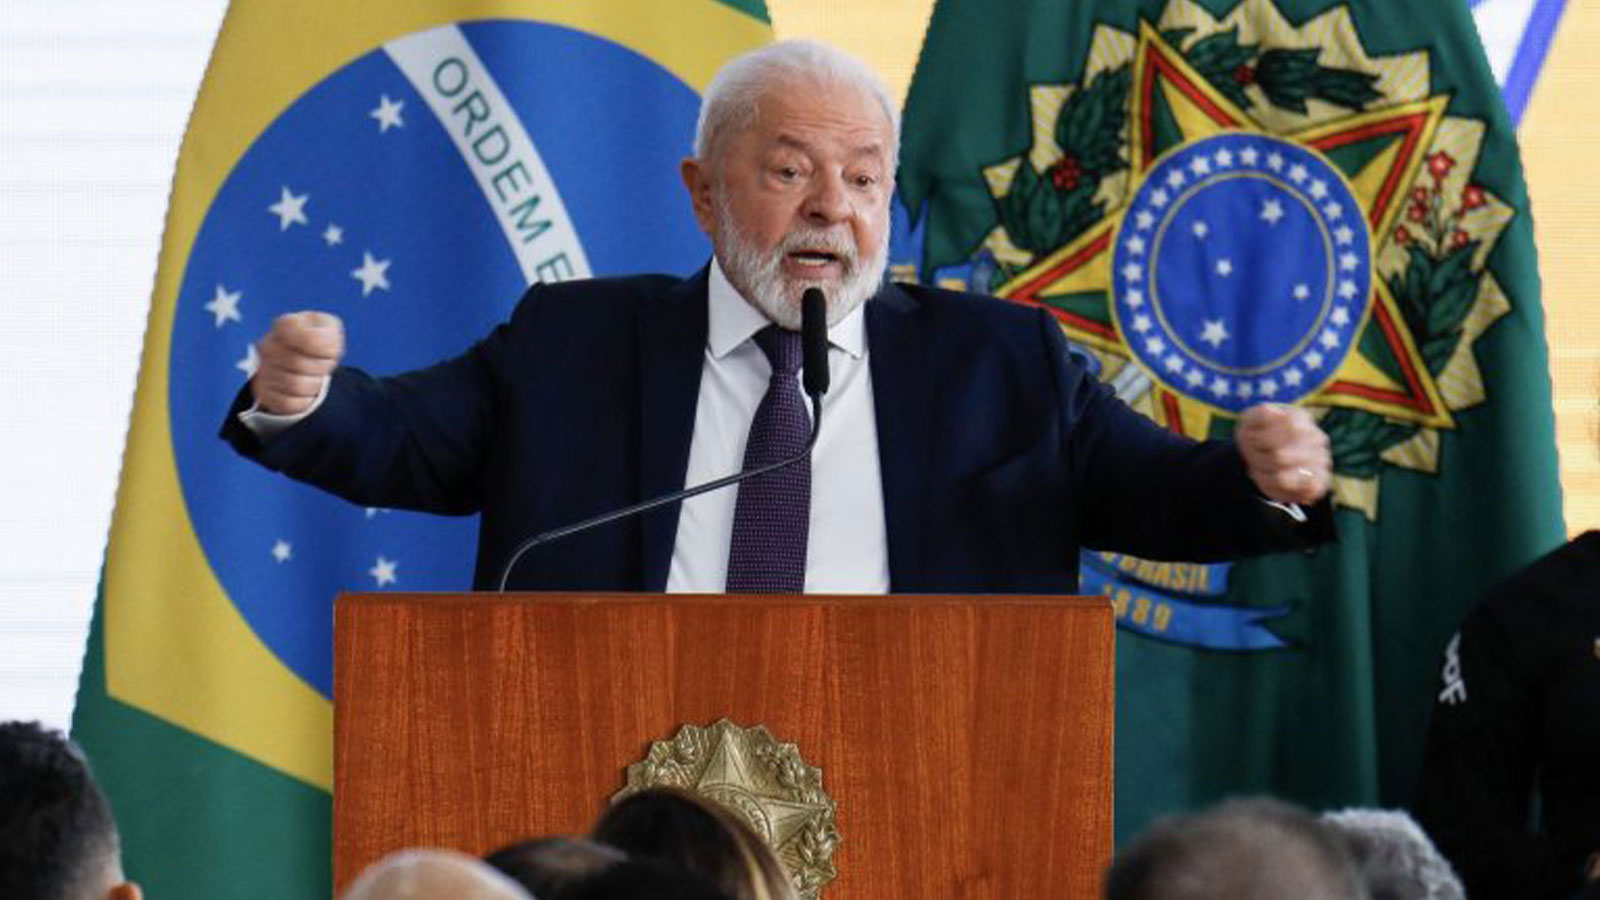 Lula’s racial-inequality reforms should set the bar for all countries to emulate